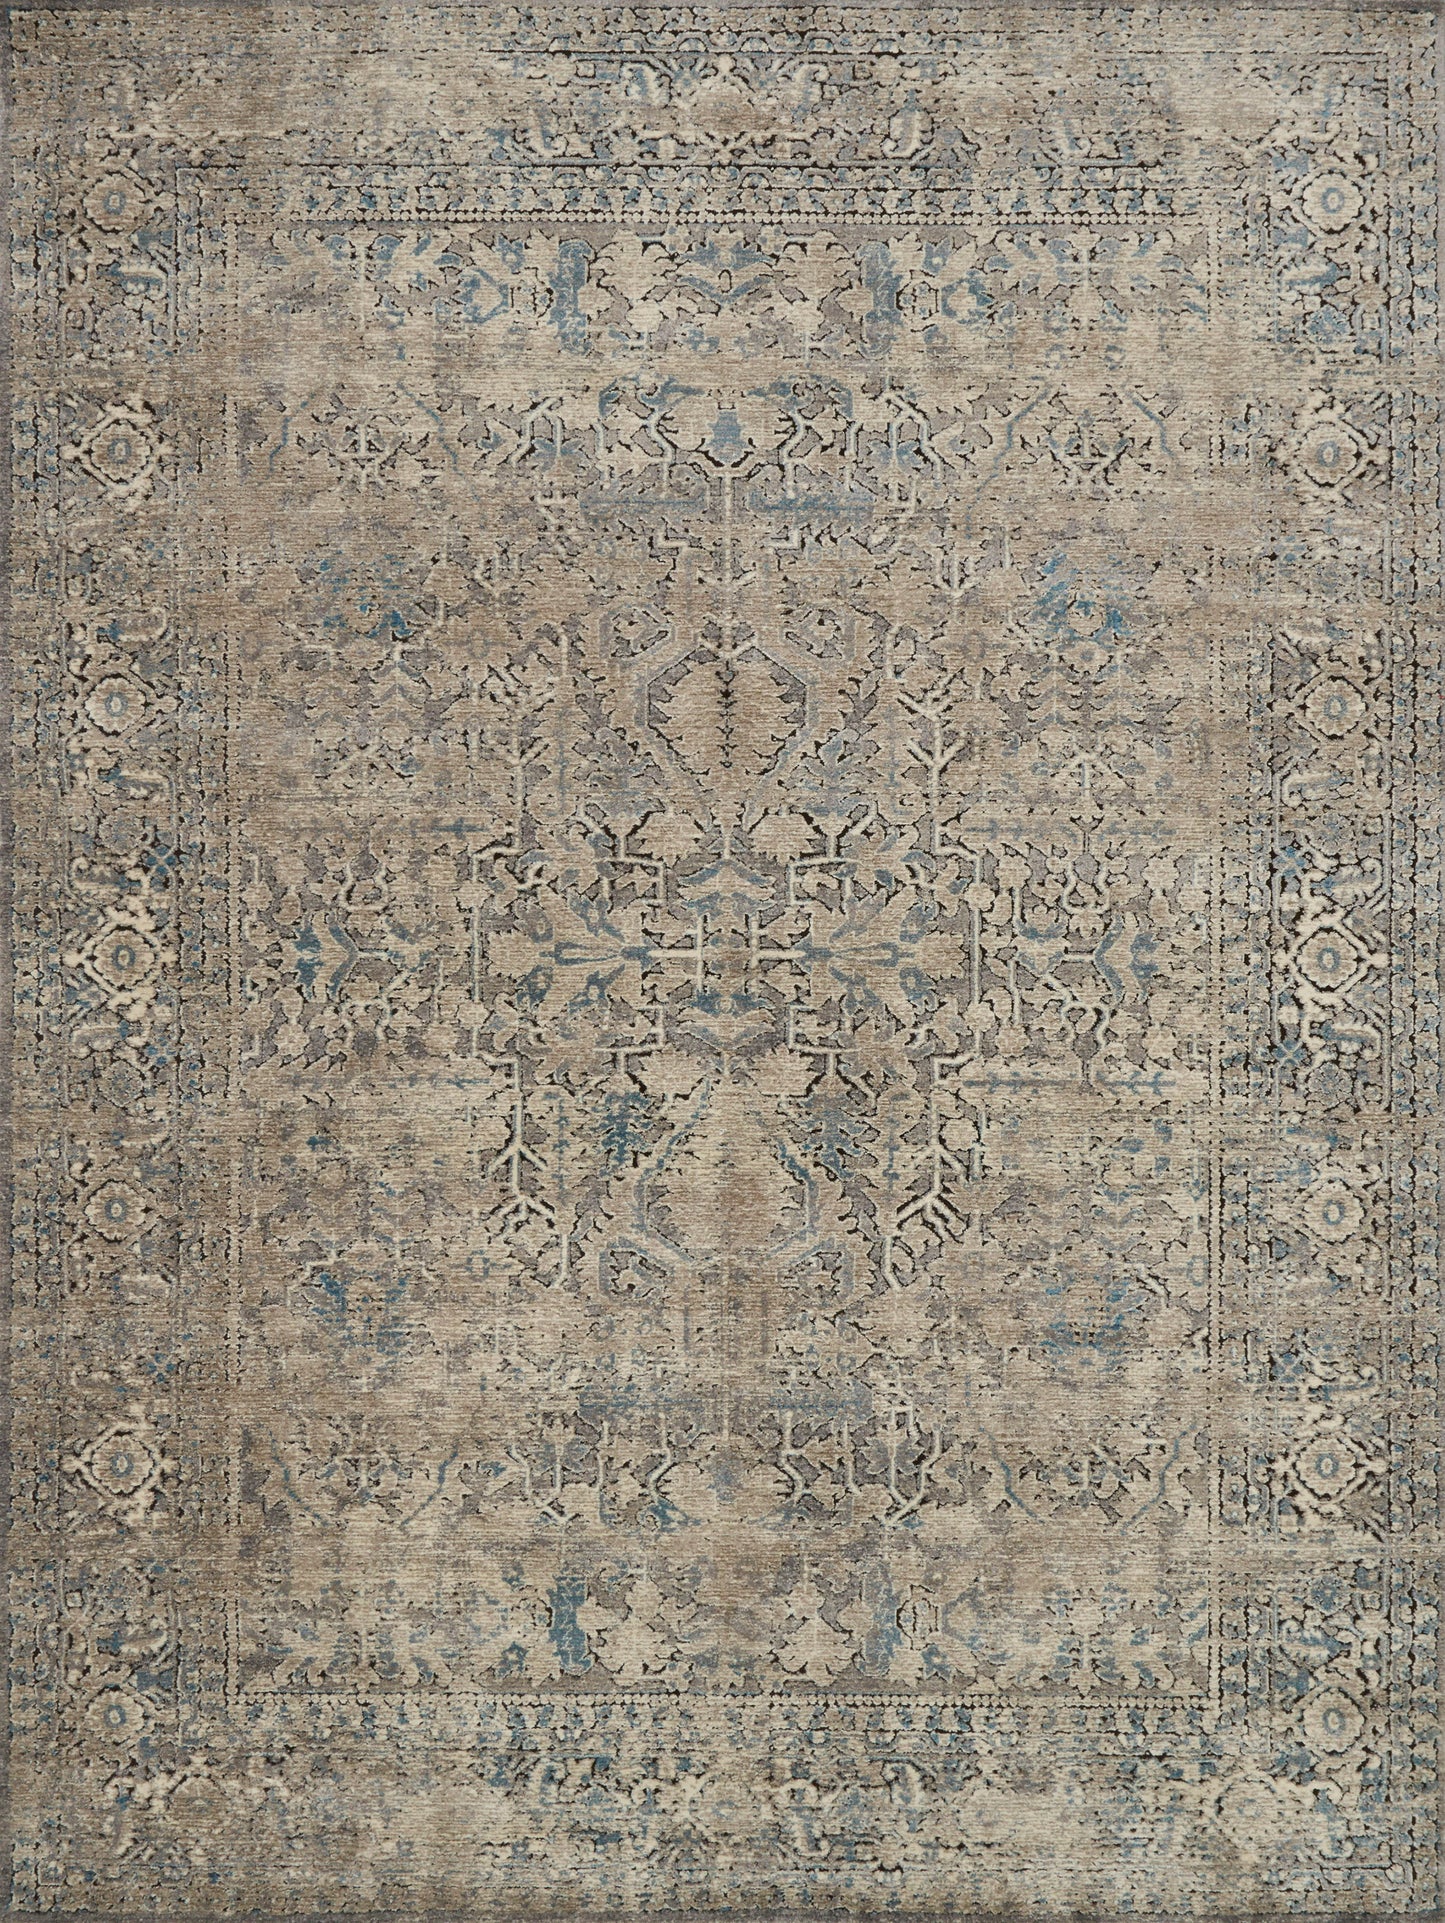 A picture of Loloi's Millennium rug, in style MV-01, color Grey / Stone